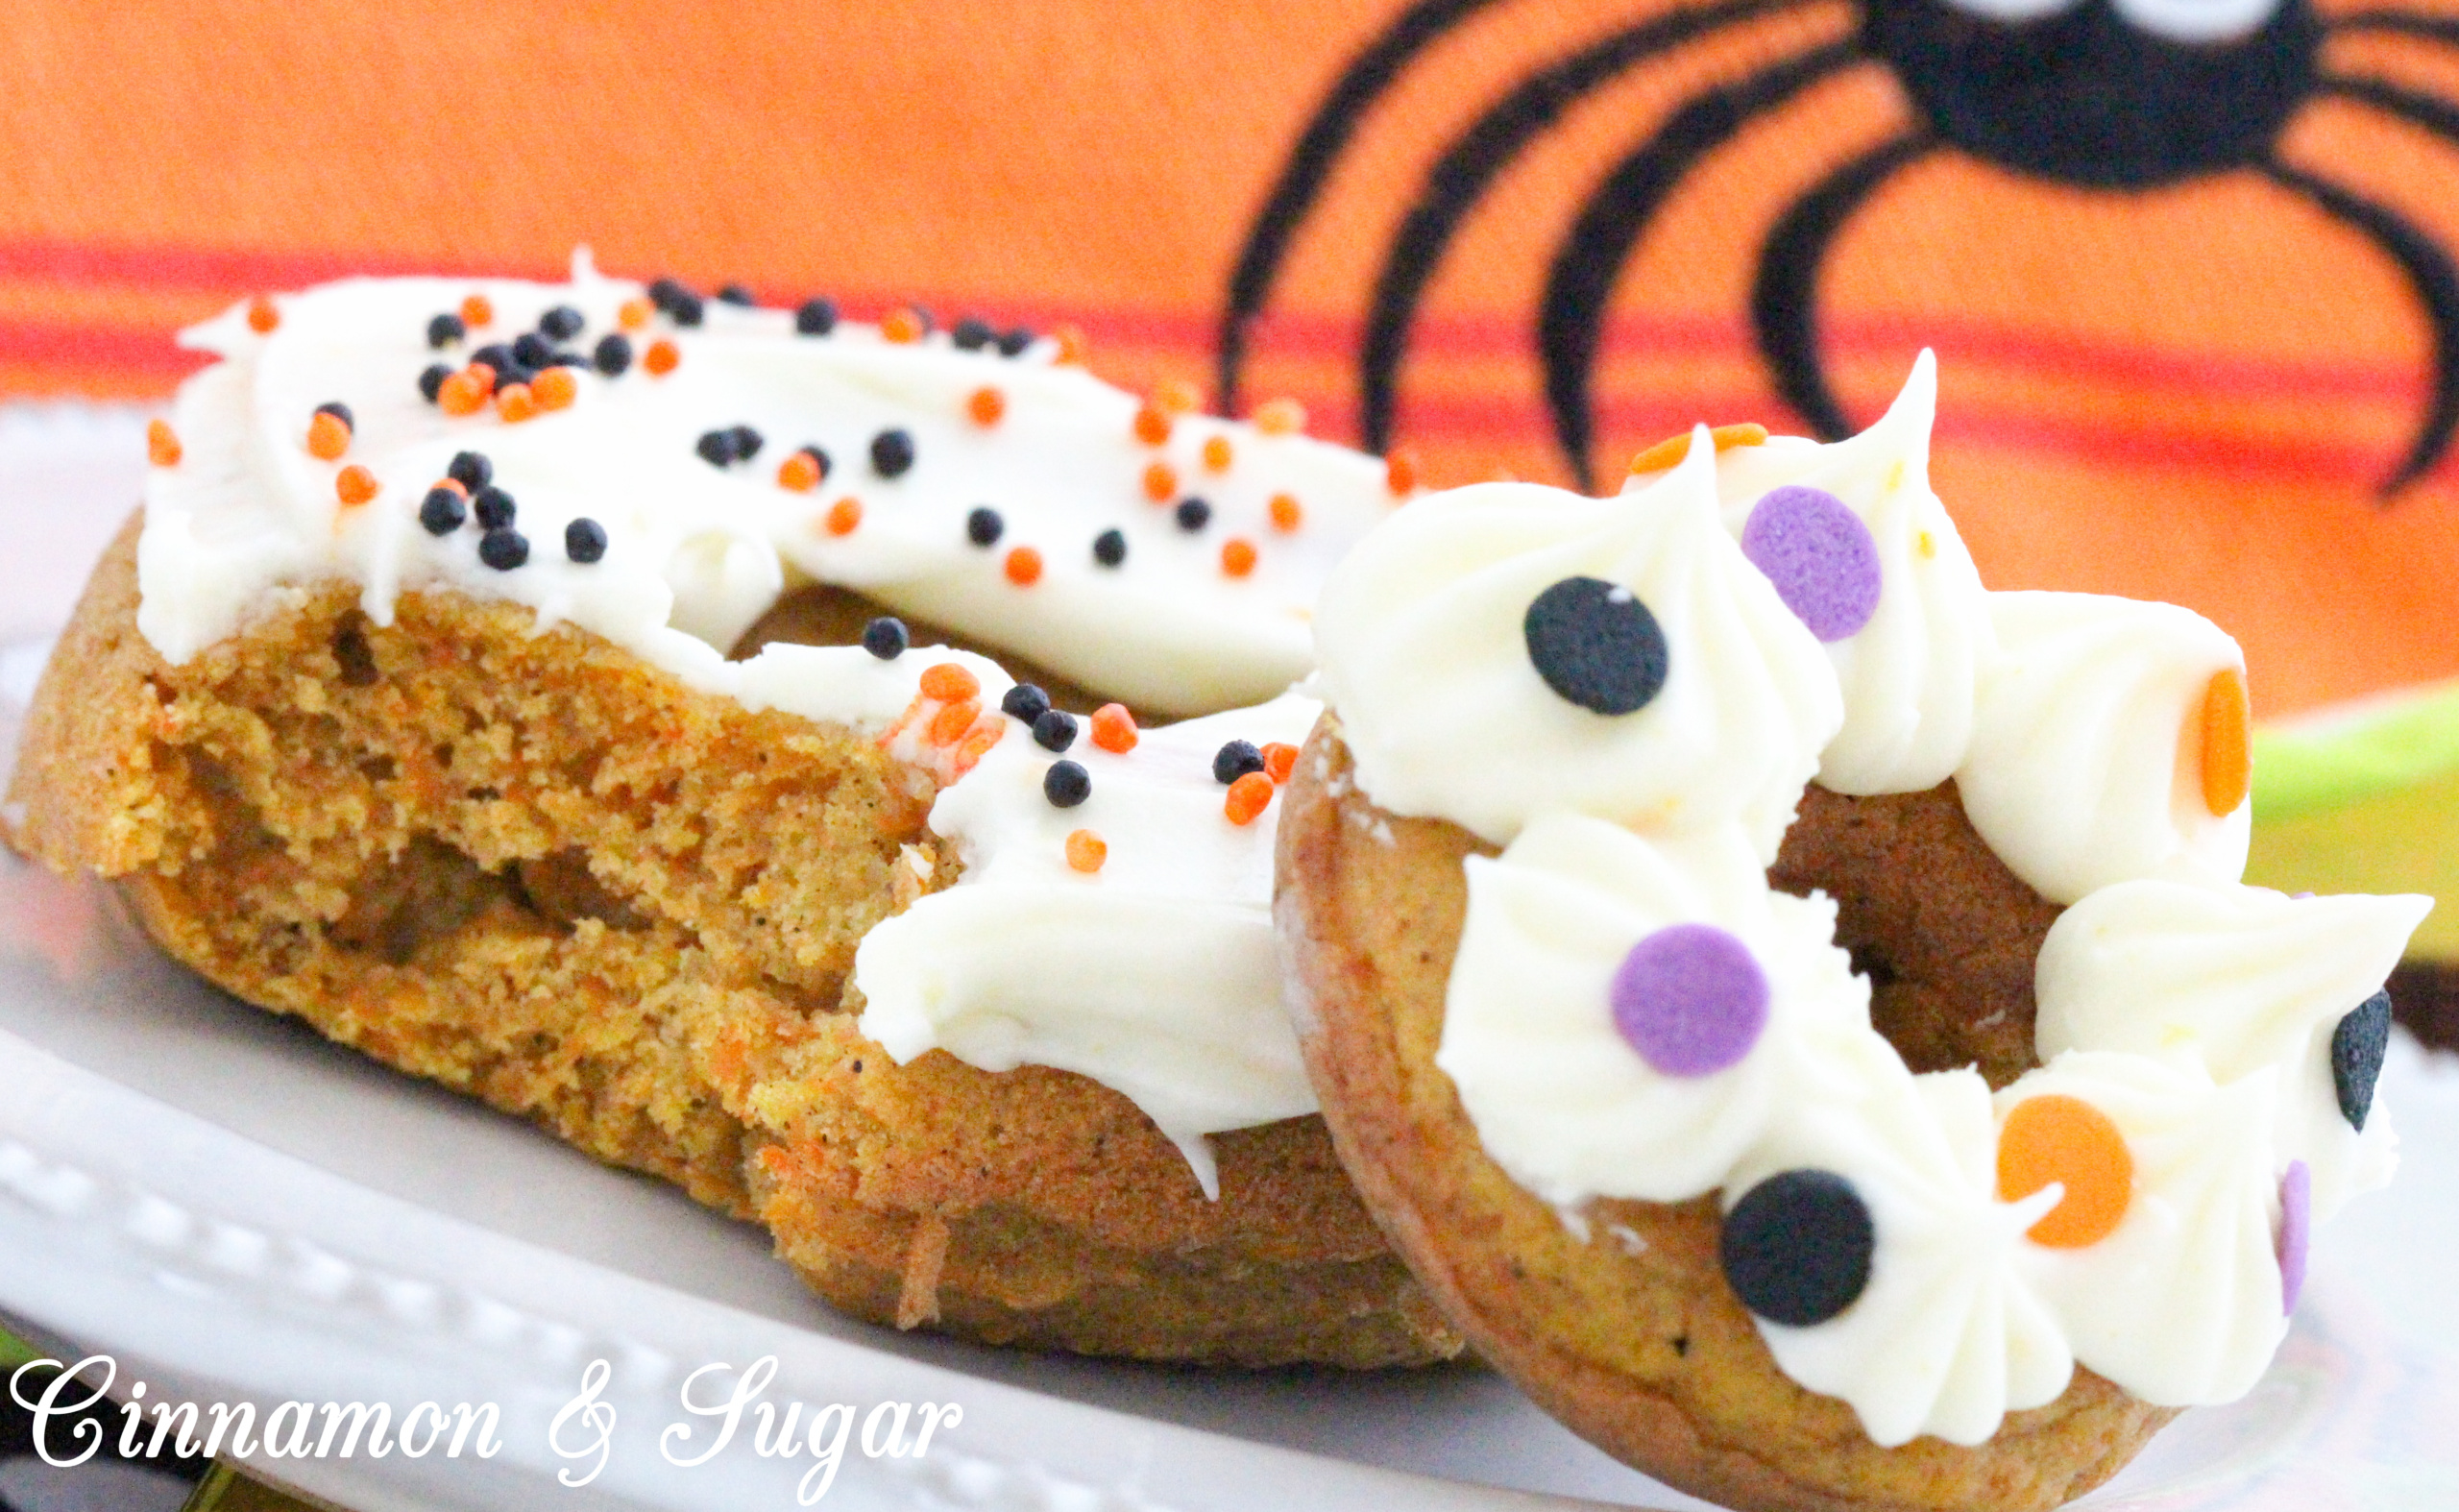 Scare-It Cake Donuts are a riff on Carrot Cake! Filled with warm, autumn spices and a generous portion of grated carrots to keep them extra moist, these donuts are a treat for all gouls and goblins! Recipe shared with permission granted by Ginger Bolton, author of BOSTON SCREAM MURDER. 